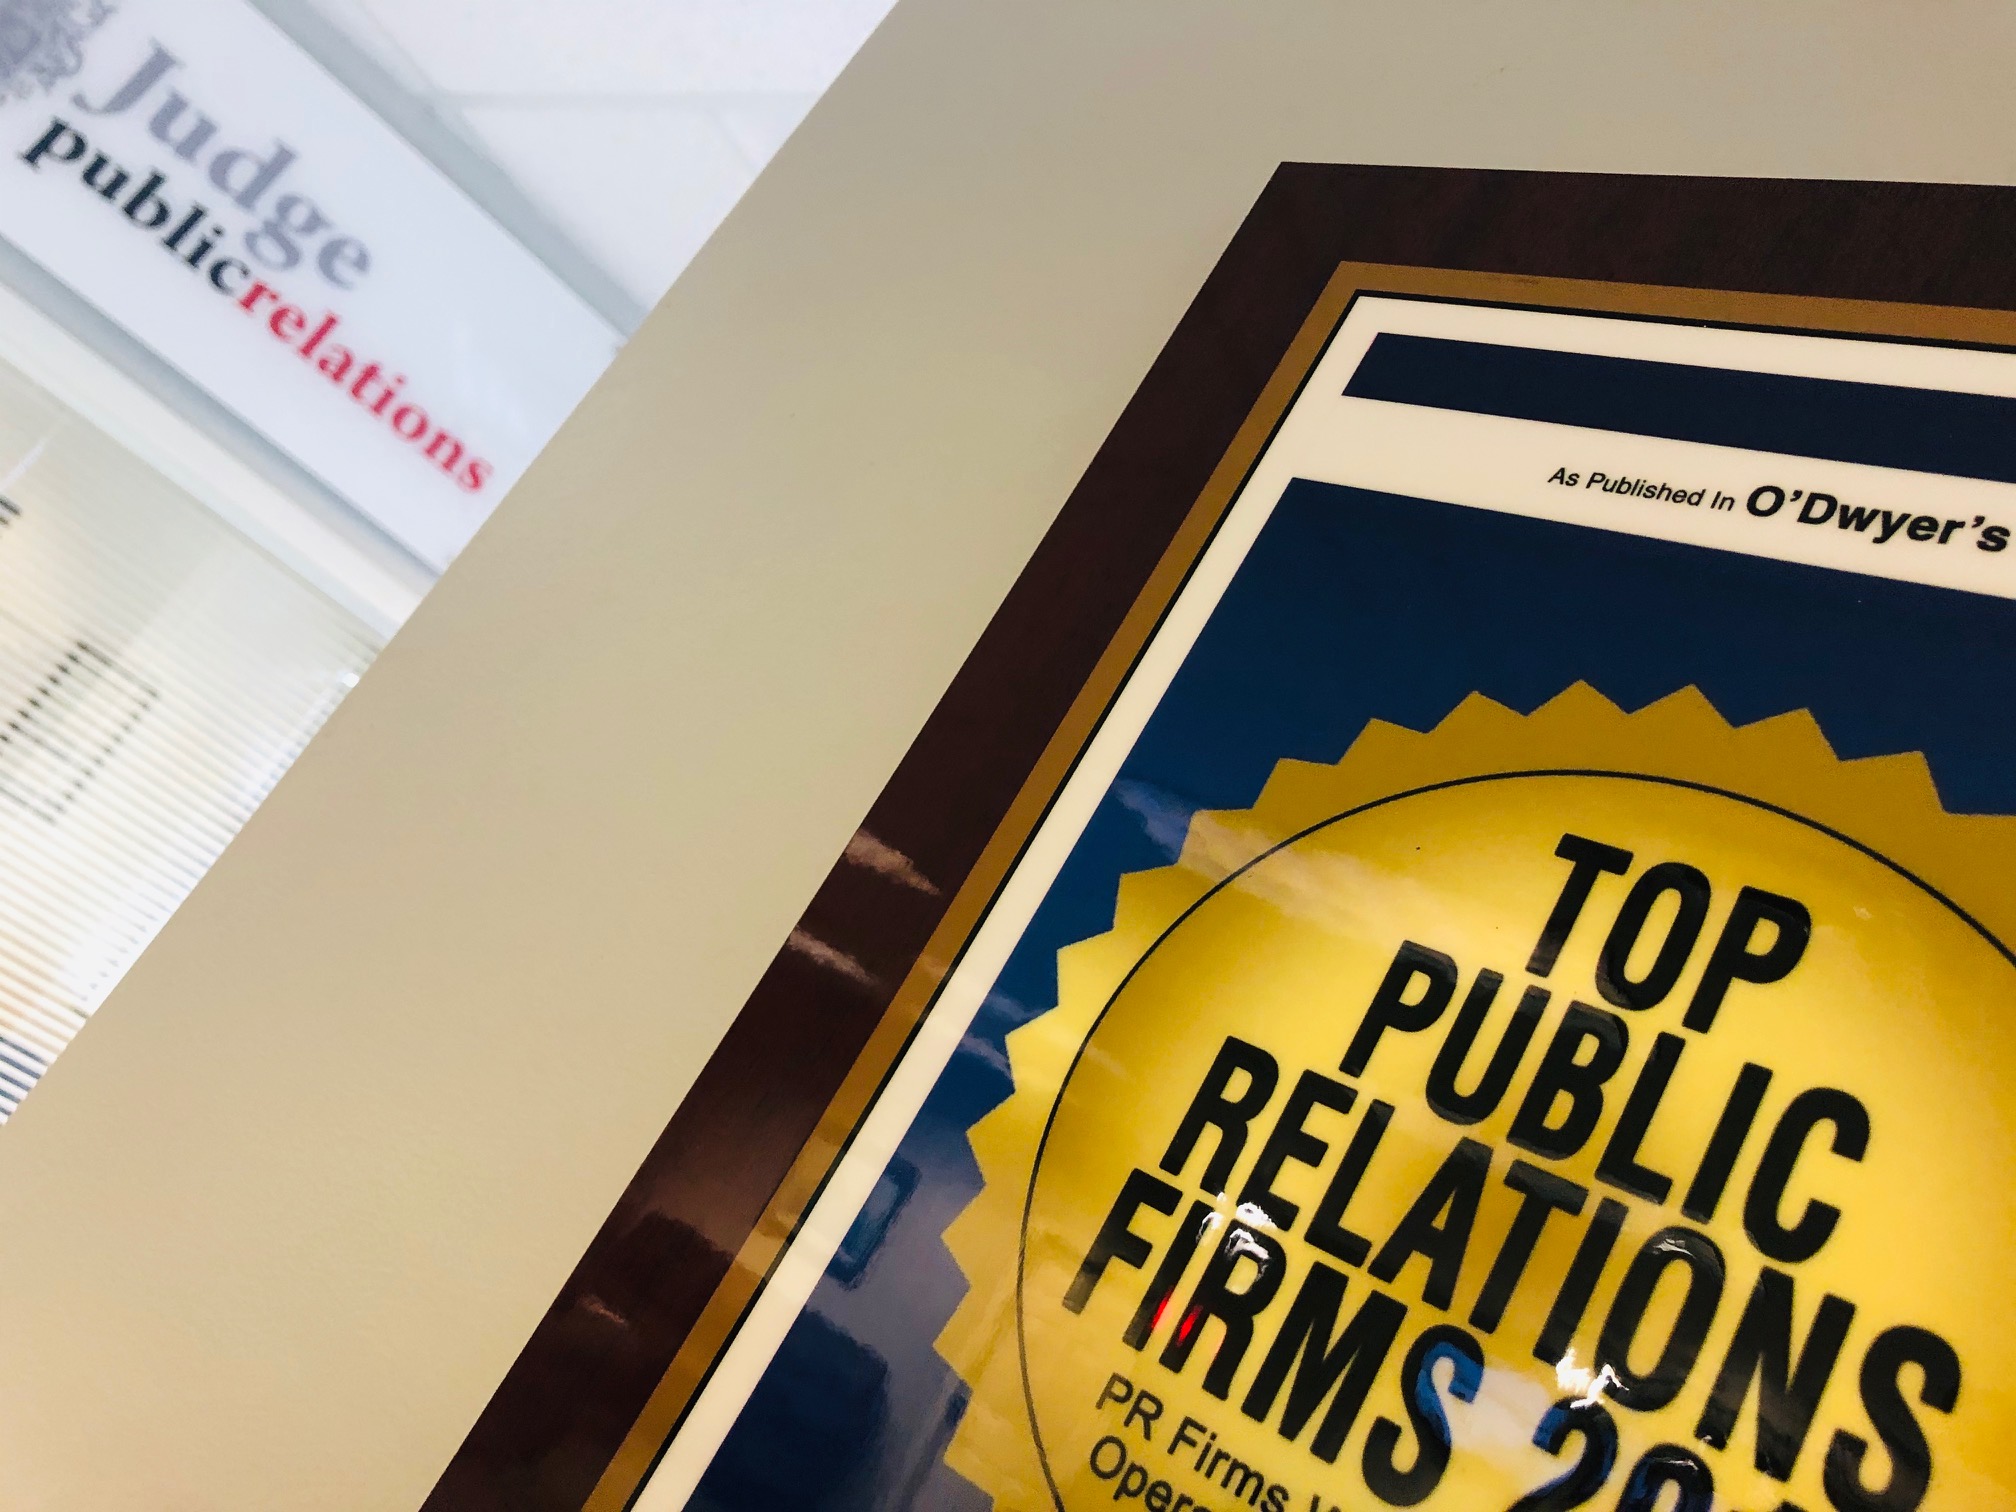 Tampa PR firm Judge Public Relations ranked among Top PR Firms in the U.S., Top 25 PR firms in Southeast U.S. for 2nd year in a row